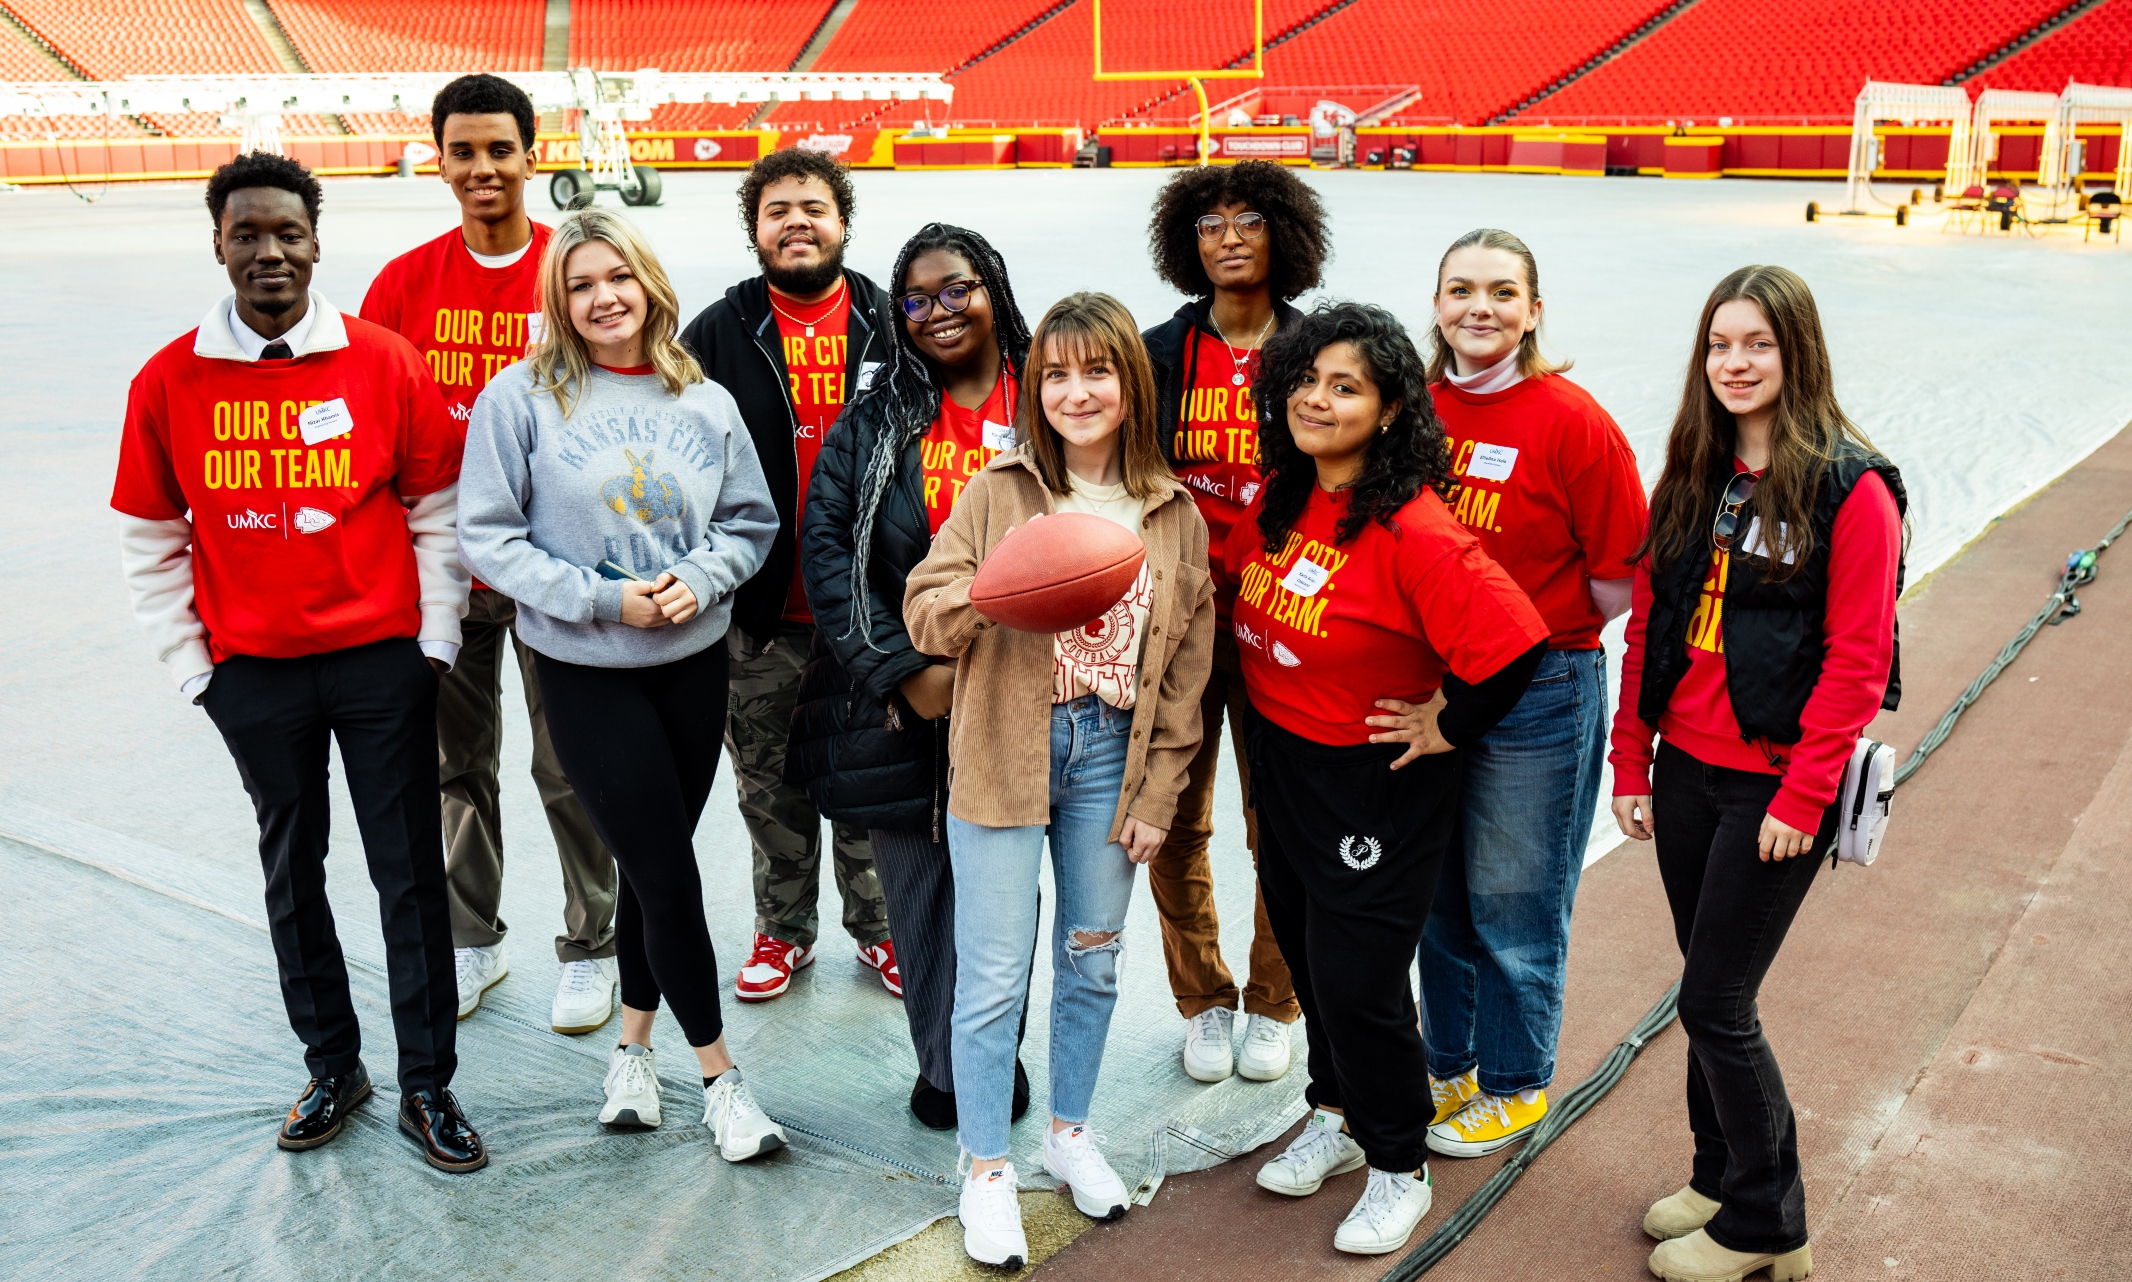 UMKC students pose for group photo on the field at Arrowhead Stadium